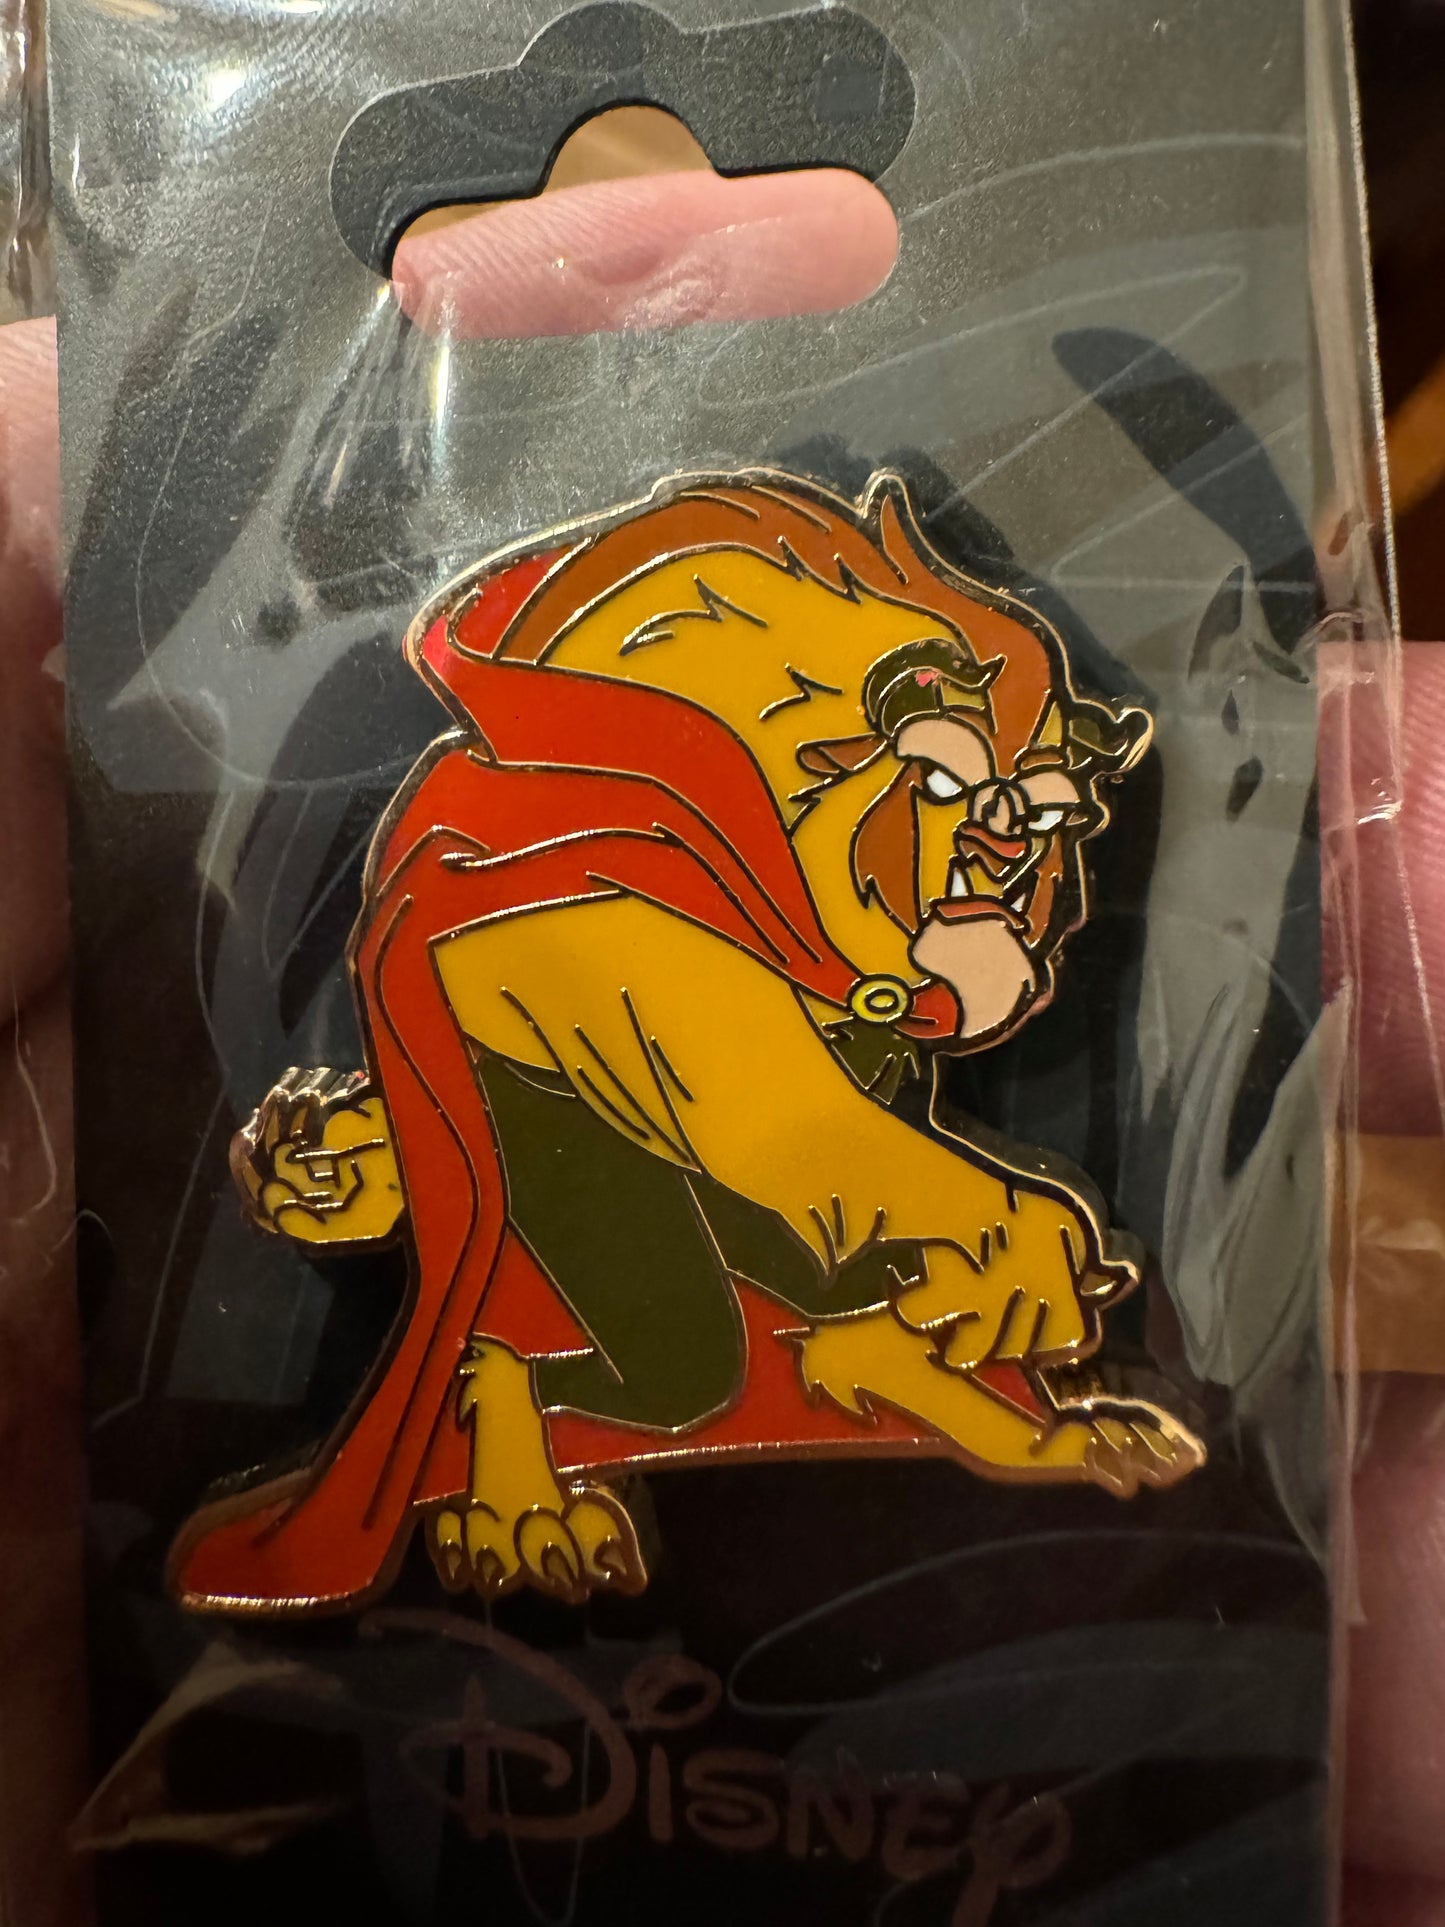 Disney Beauty And The Beast; Beast Collectible Pin Limited Edition